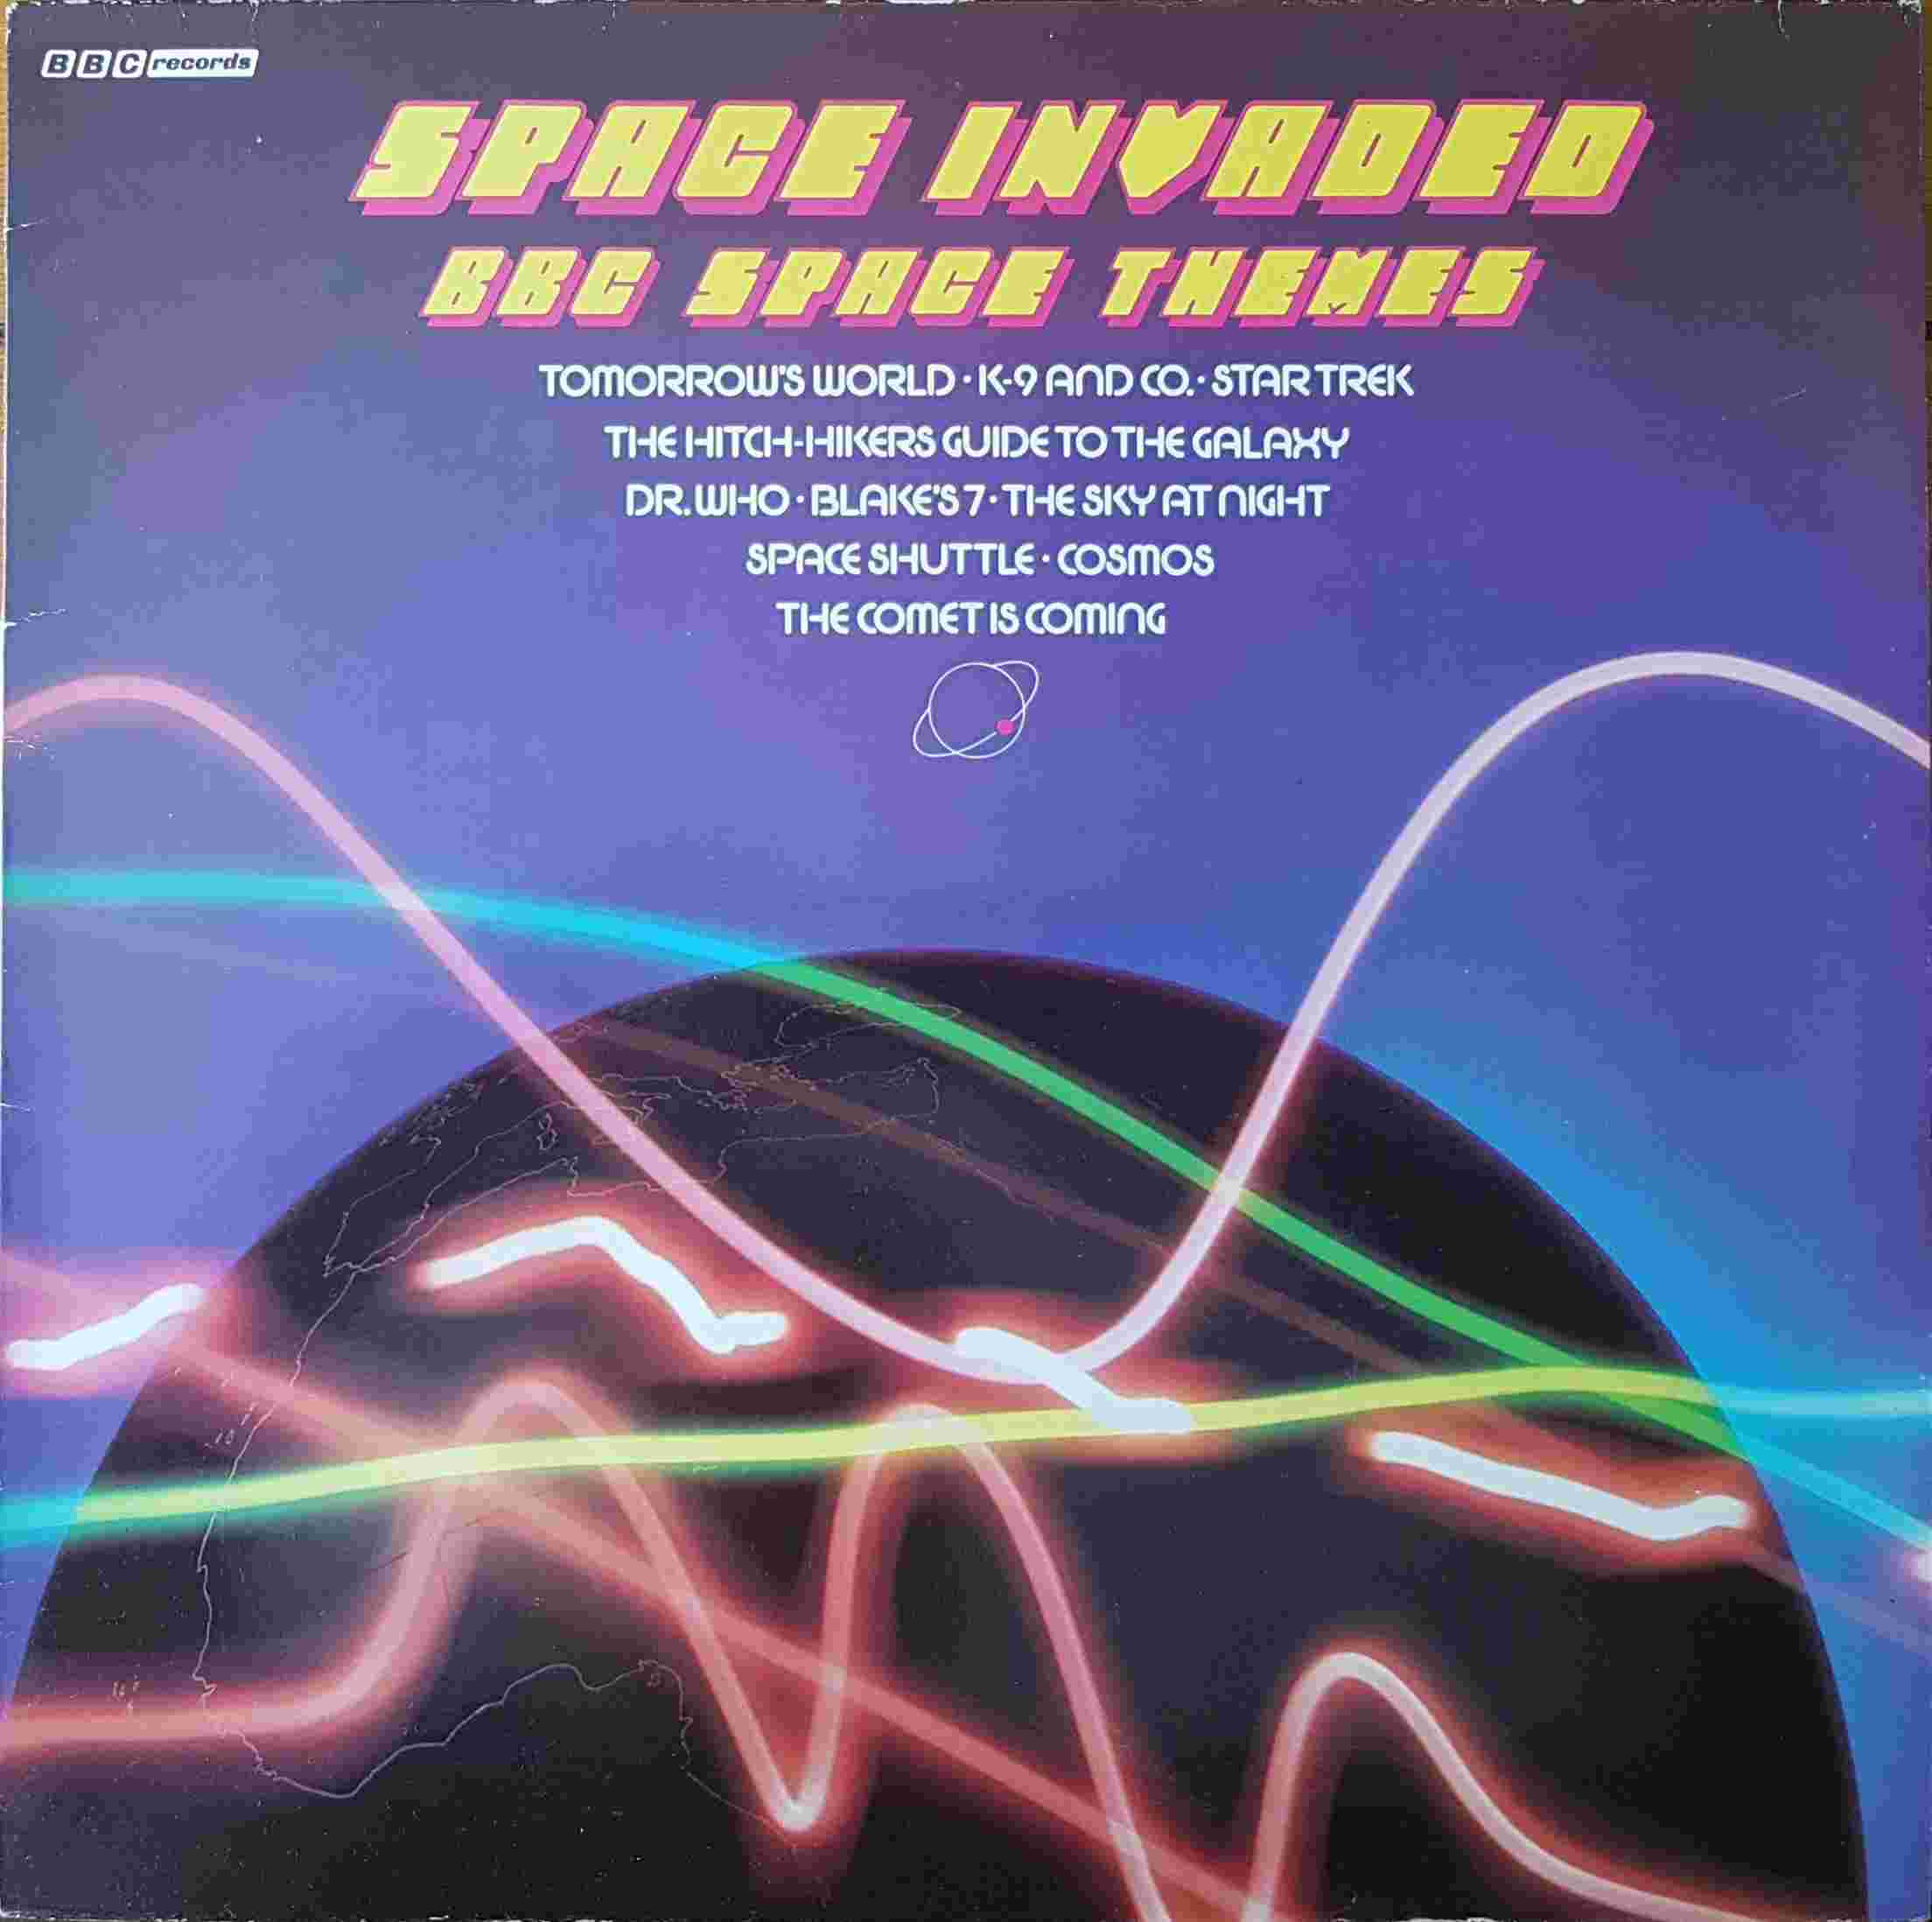 Picture of REH 442 Space Invaded - BBC space themes by artist Various from the BBC albums - Records and Tapes library